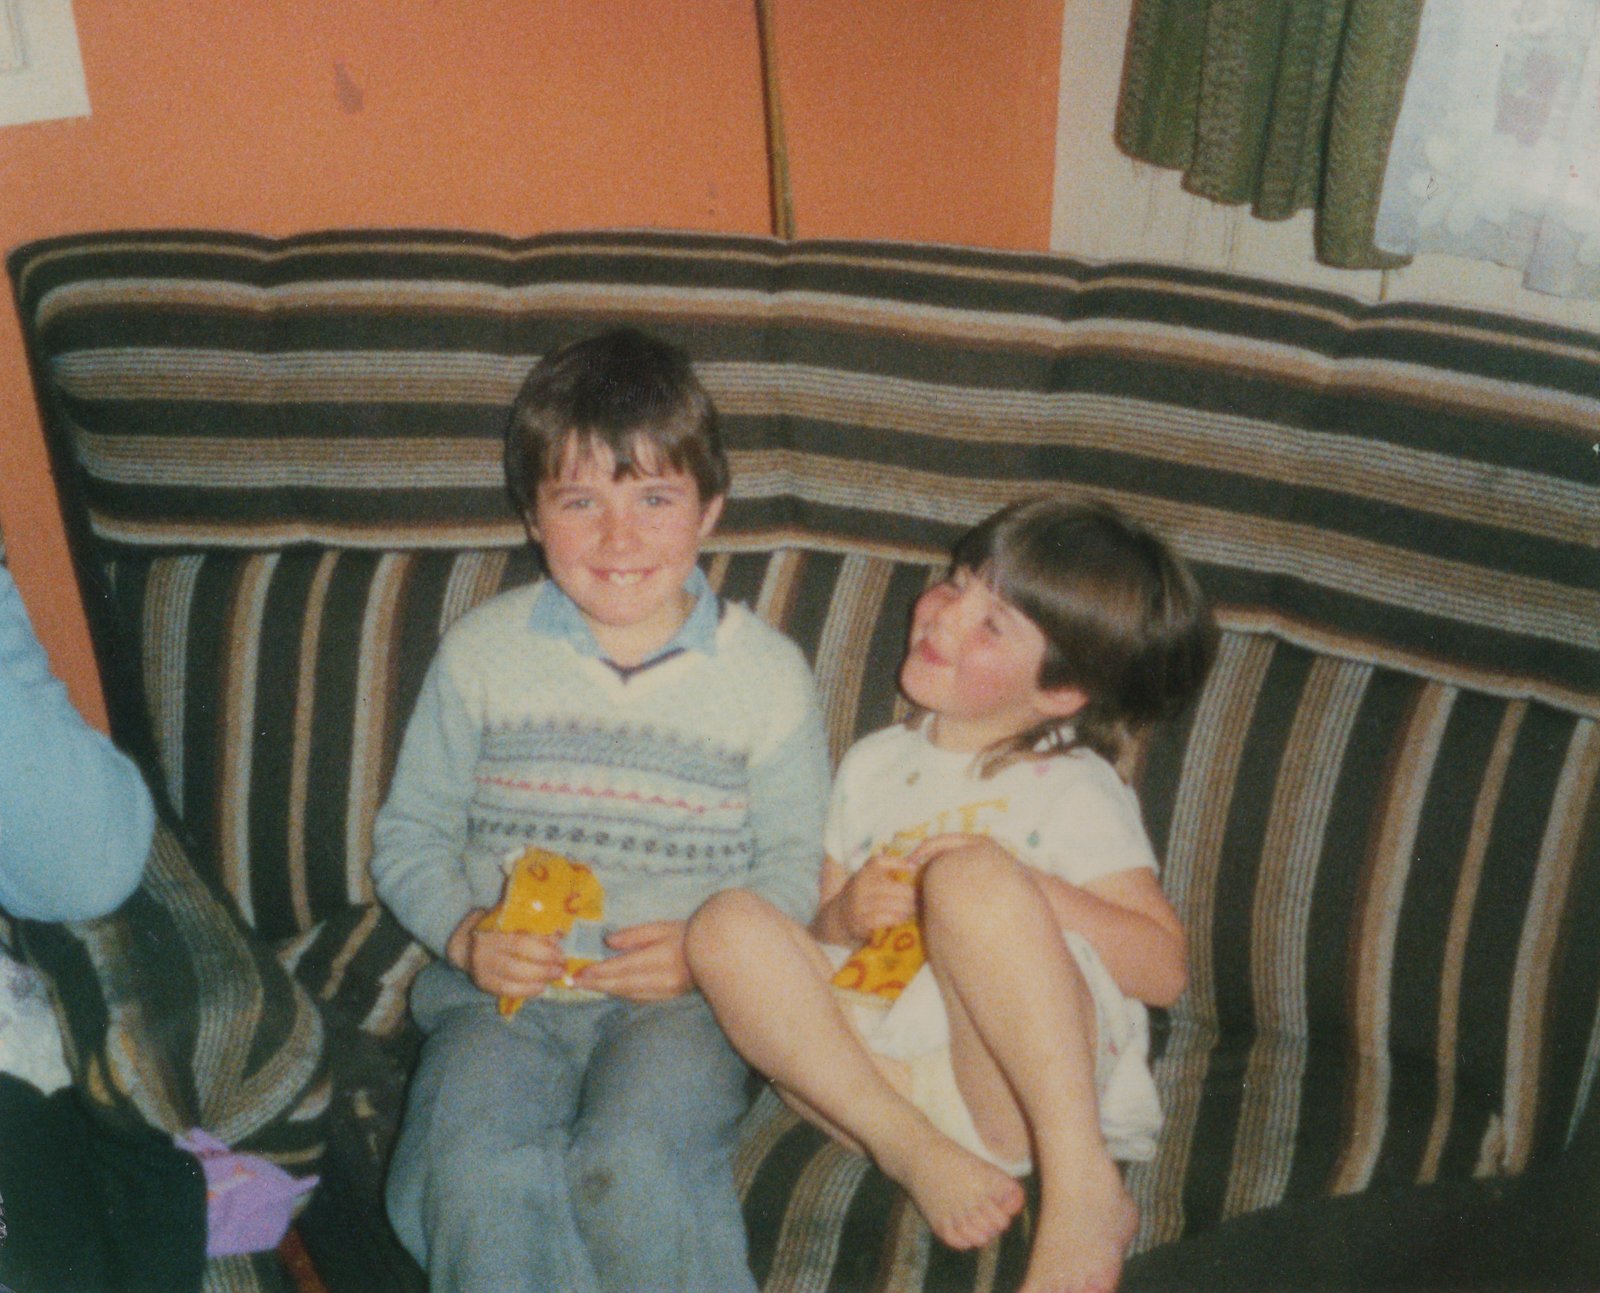 Siblings Kevin and Lisa Crowne in their home at O’Kane Park, Omagh, in 1986.